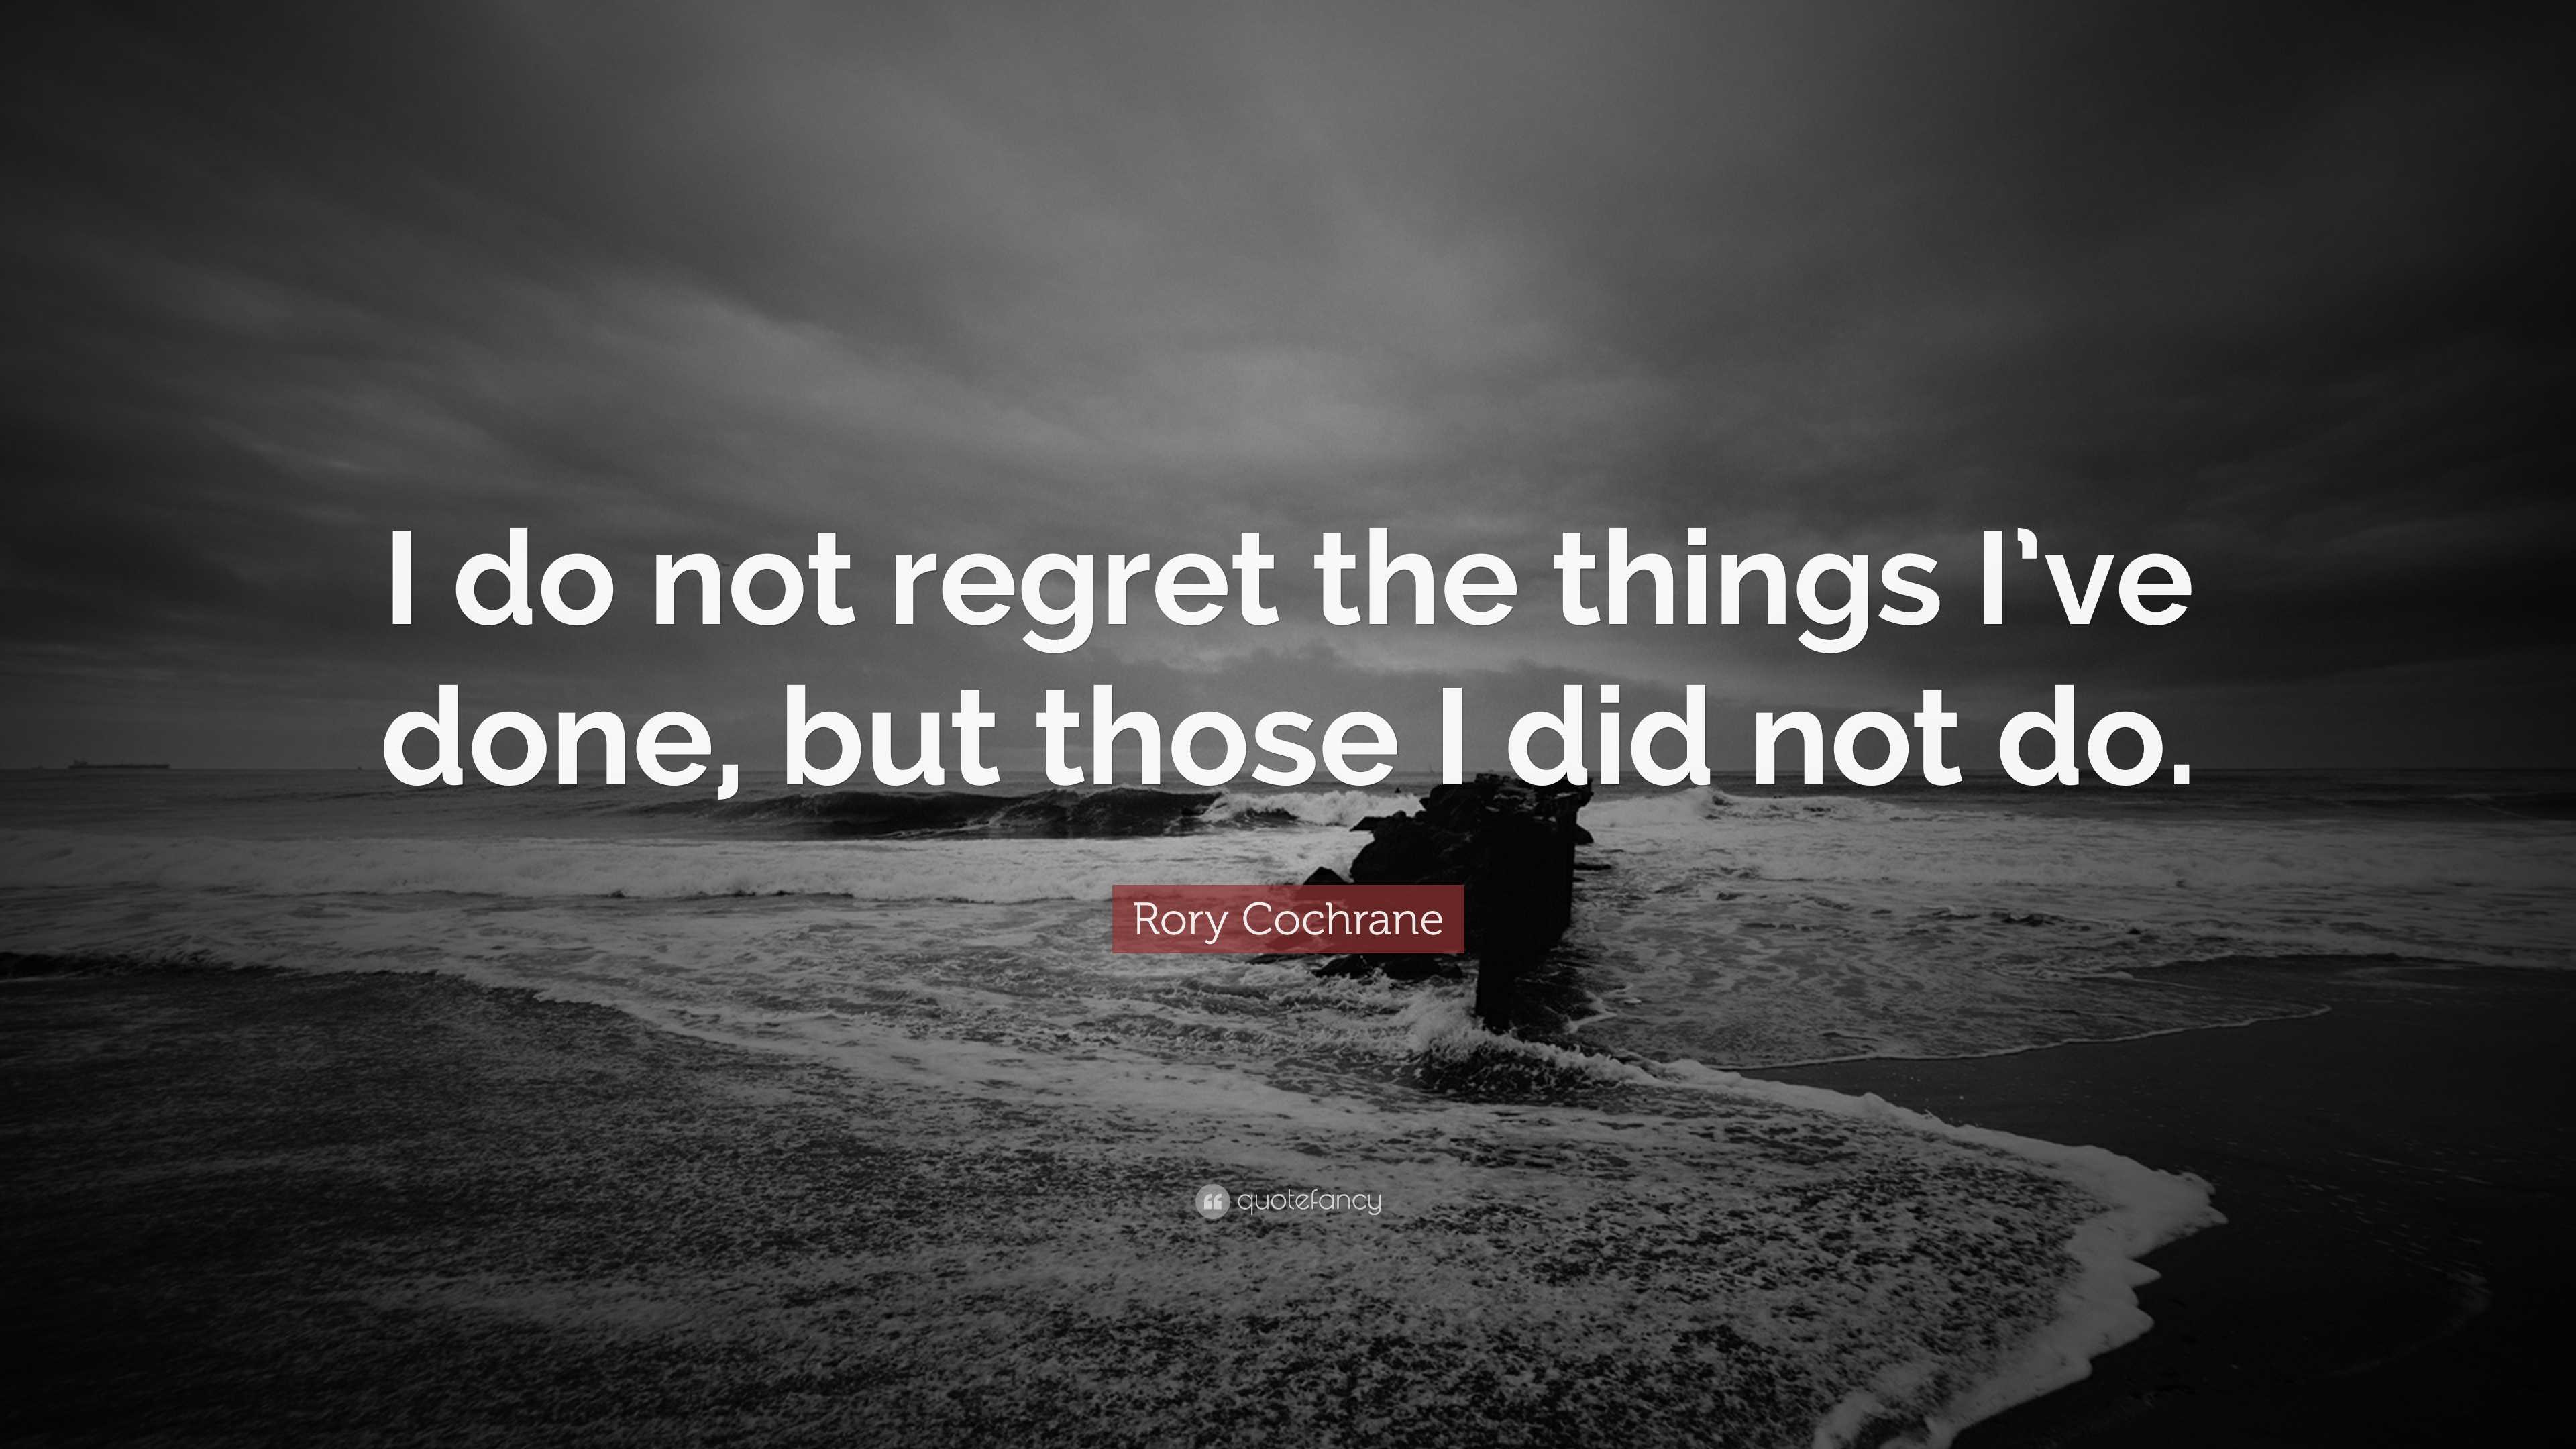 Rory Cochrane Quote: “I do not regret the things I've done, but